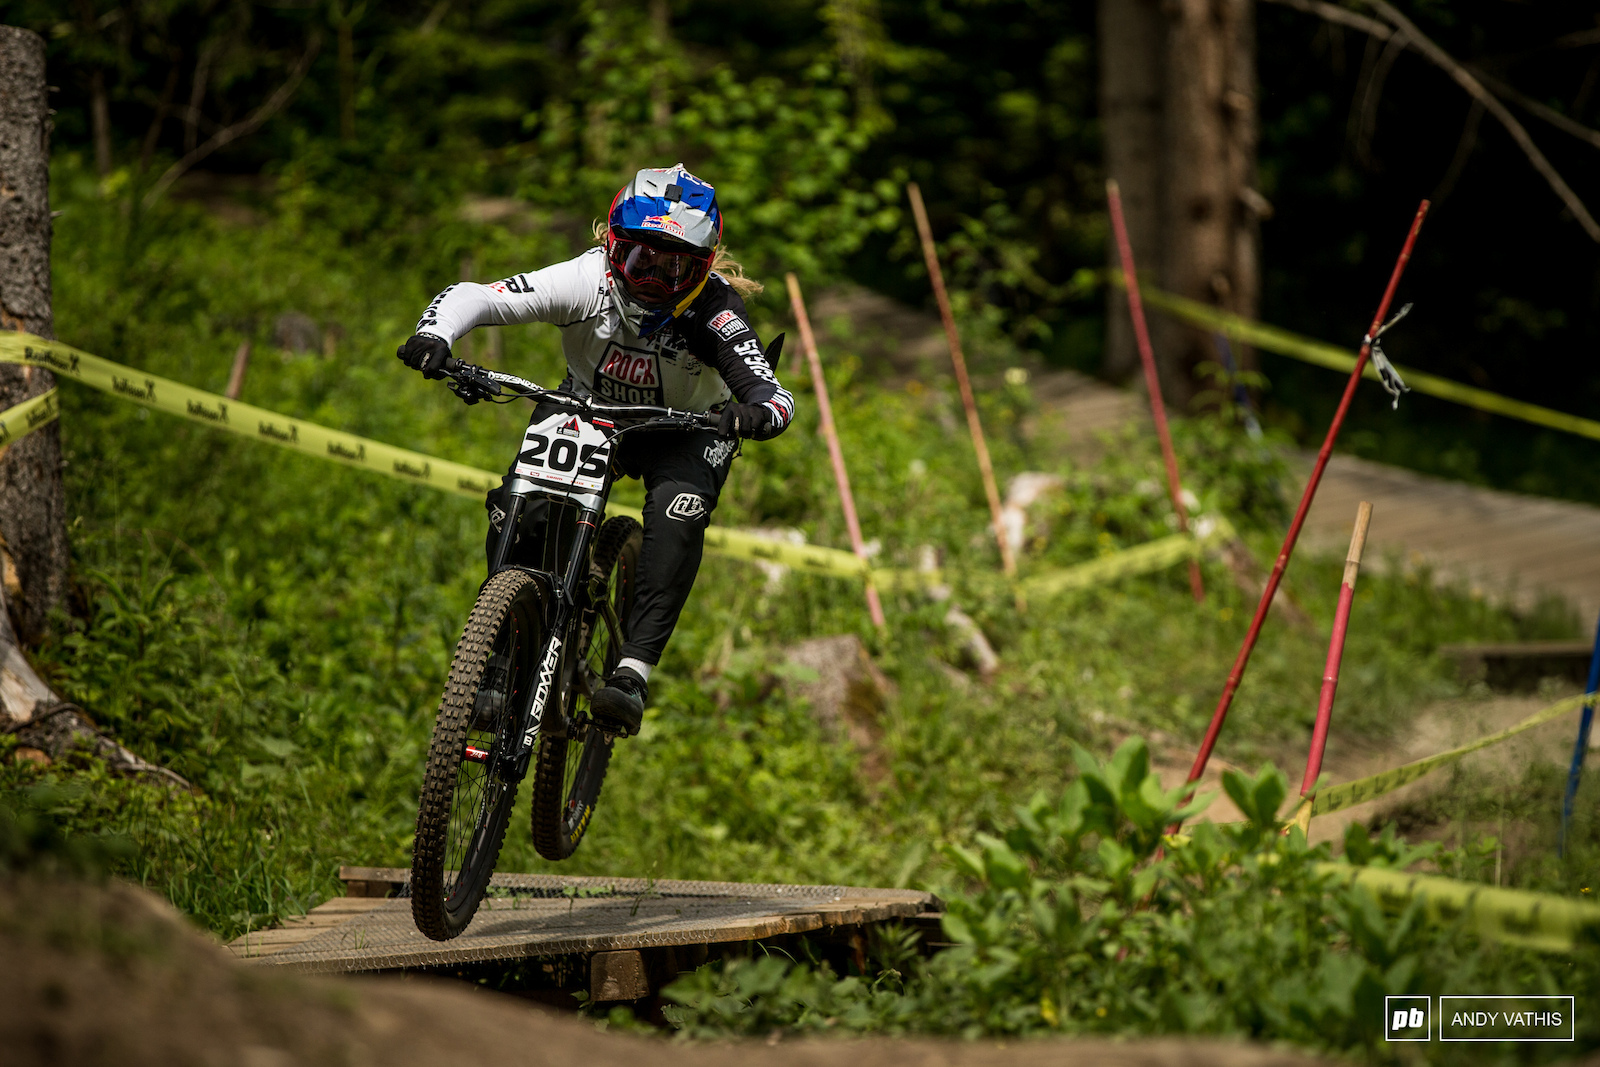 Vali Holl took her frustration out from her fall in Leogang on the course. She d win the Elite Women s race by two seconds.